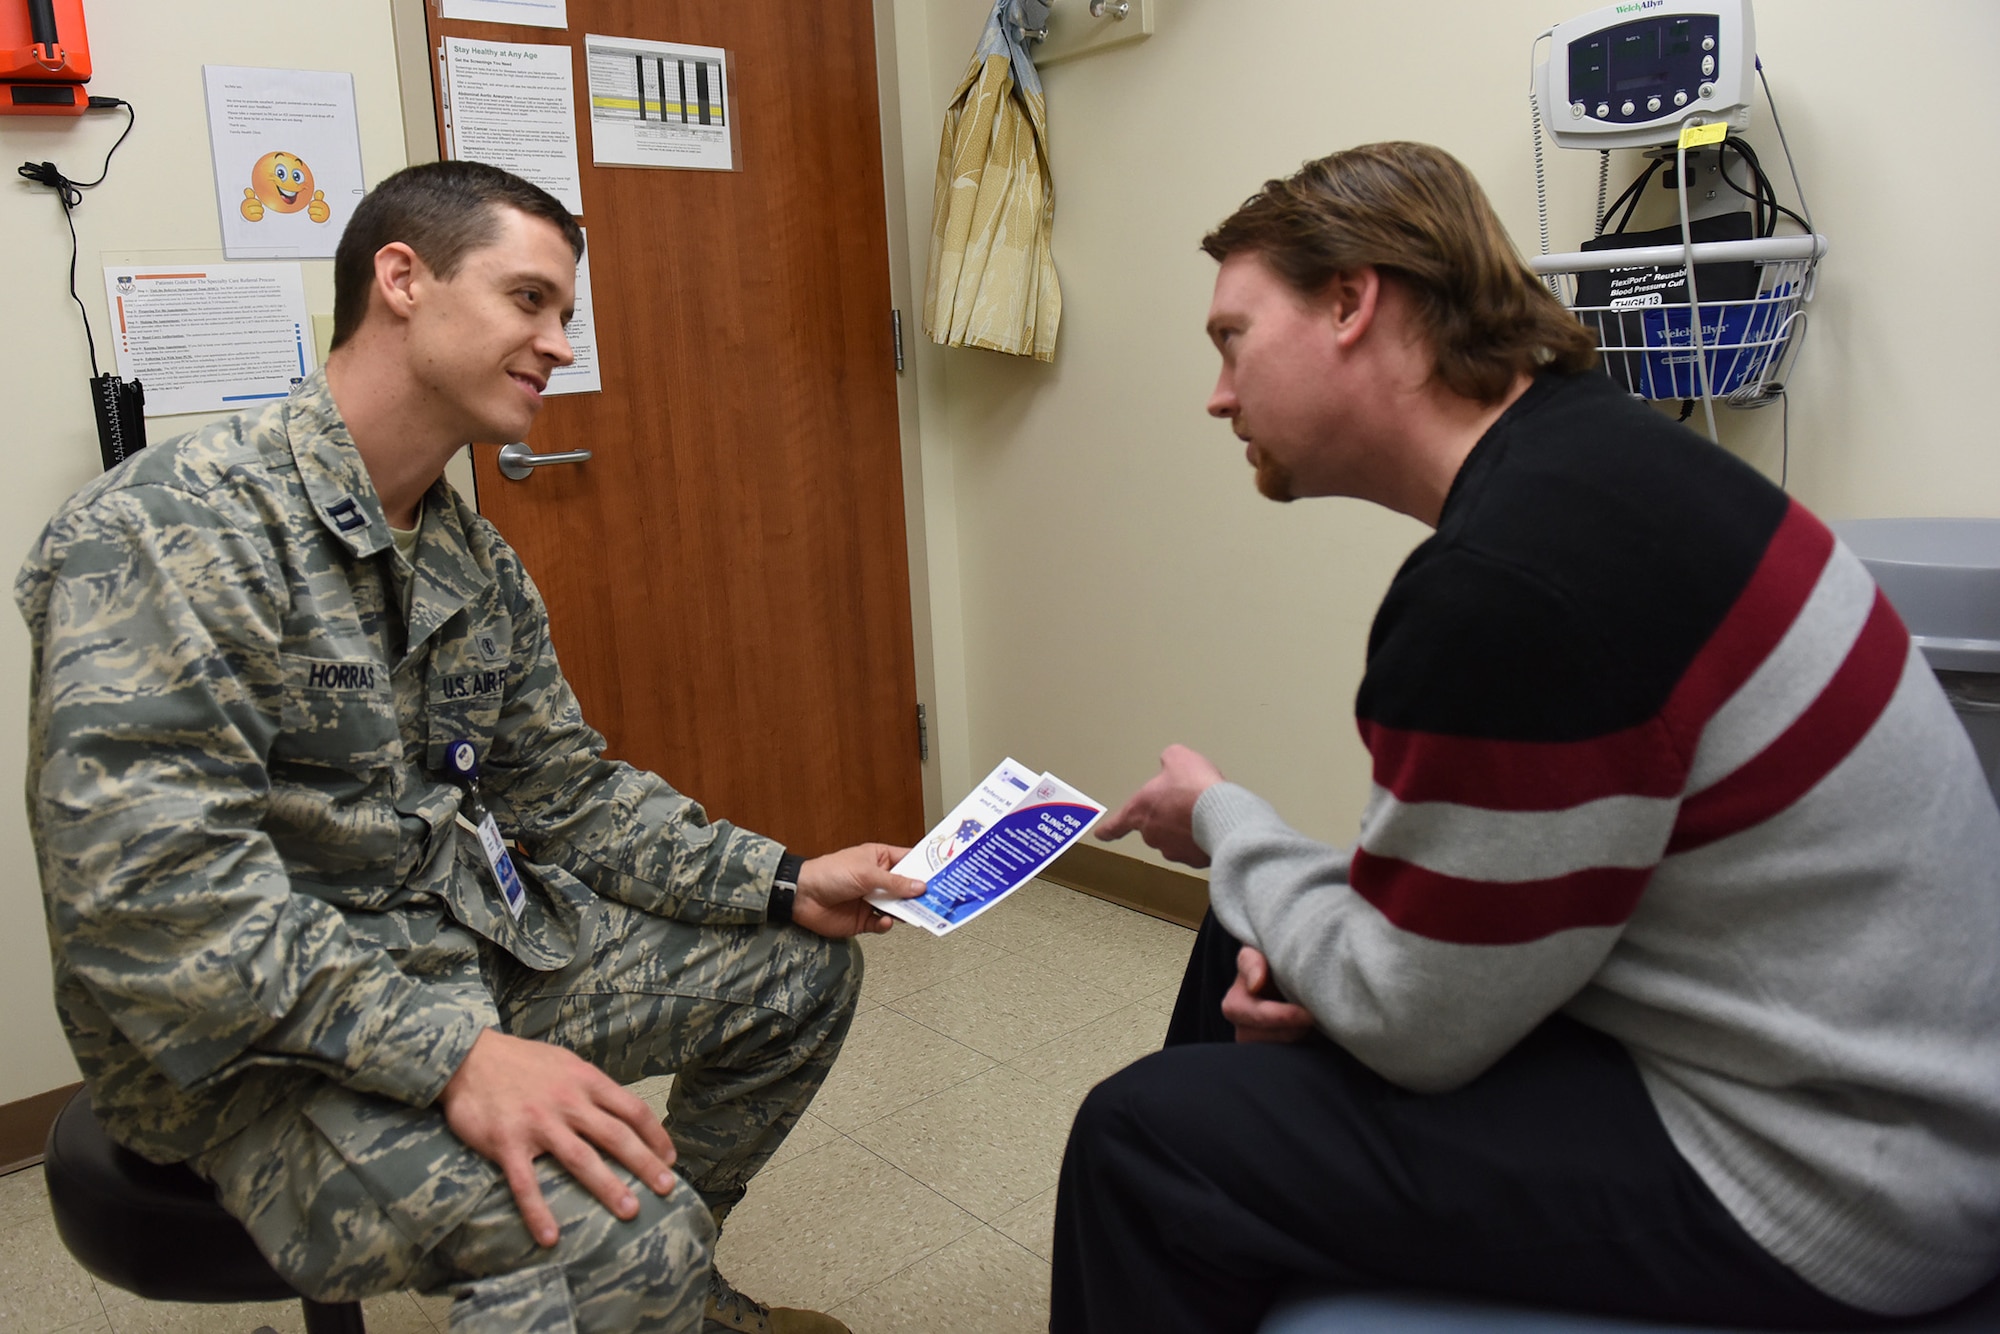 Capt. Stephen Horras, 341st Medical Operations Squadron physician, discusses the benefits of using Tricare Online with a patient, Dec. 8, 2016.  Tricare Online is a web portal that allows patients to take care of their medical needs such as make appointments, look at their health record and send direct messages to their health care provider while online.  (U.S. Air Force photo/Jason Heavner)